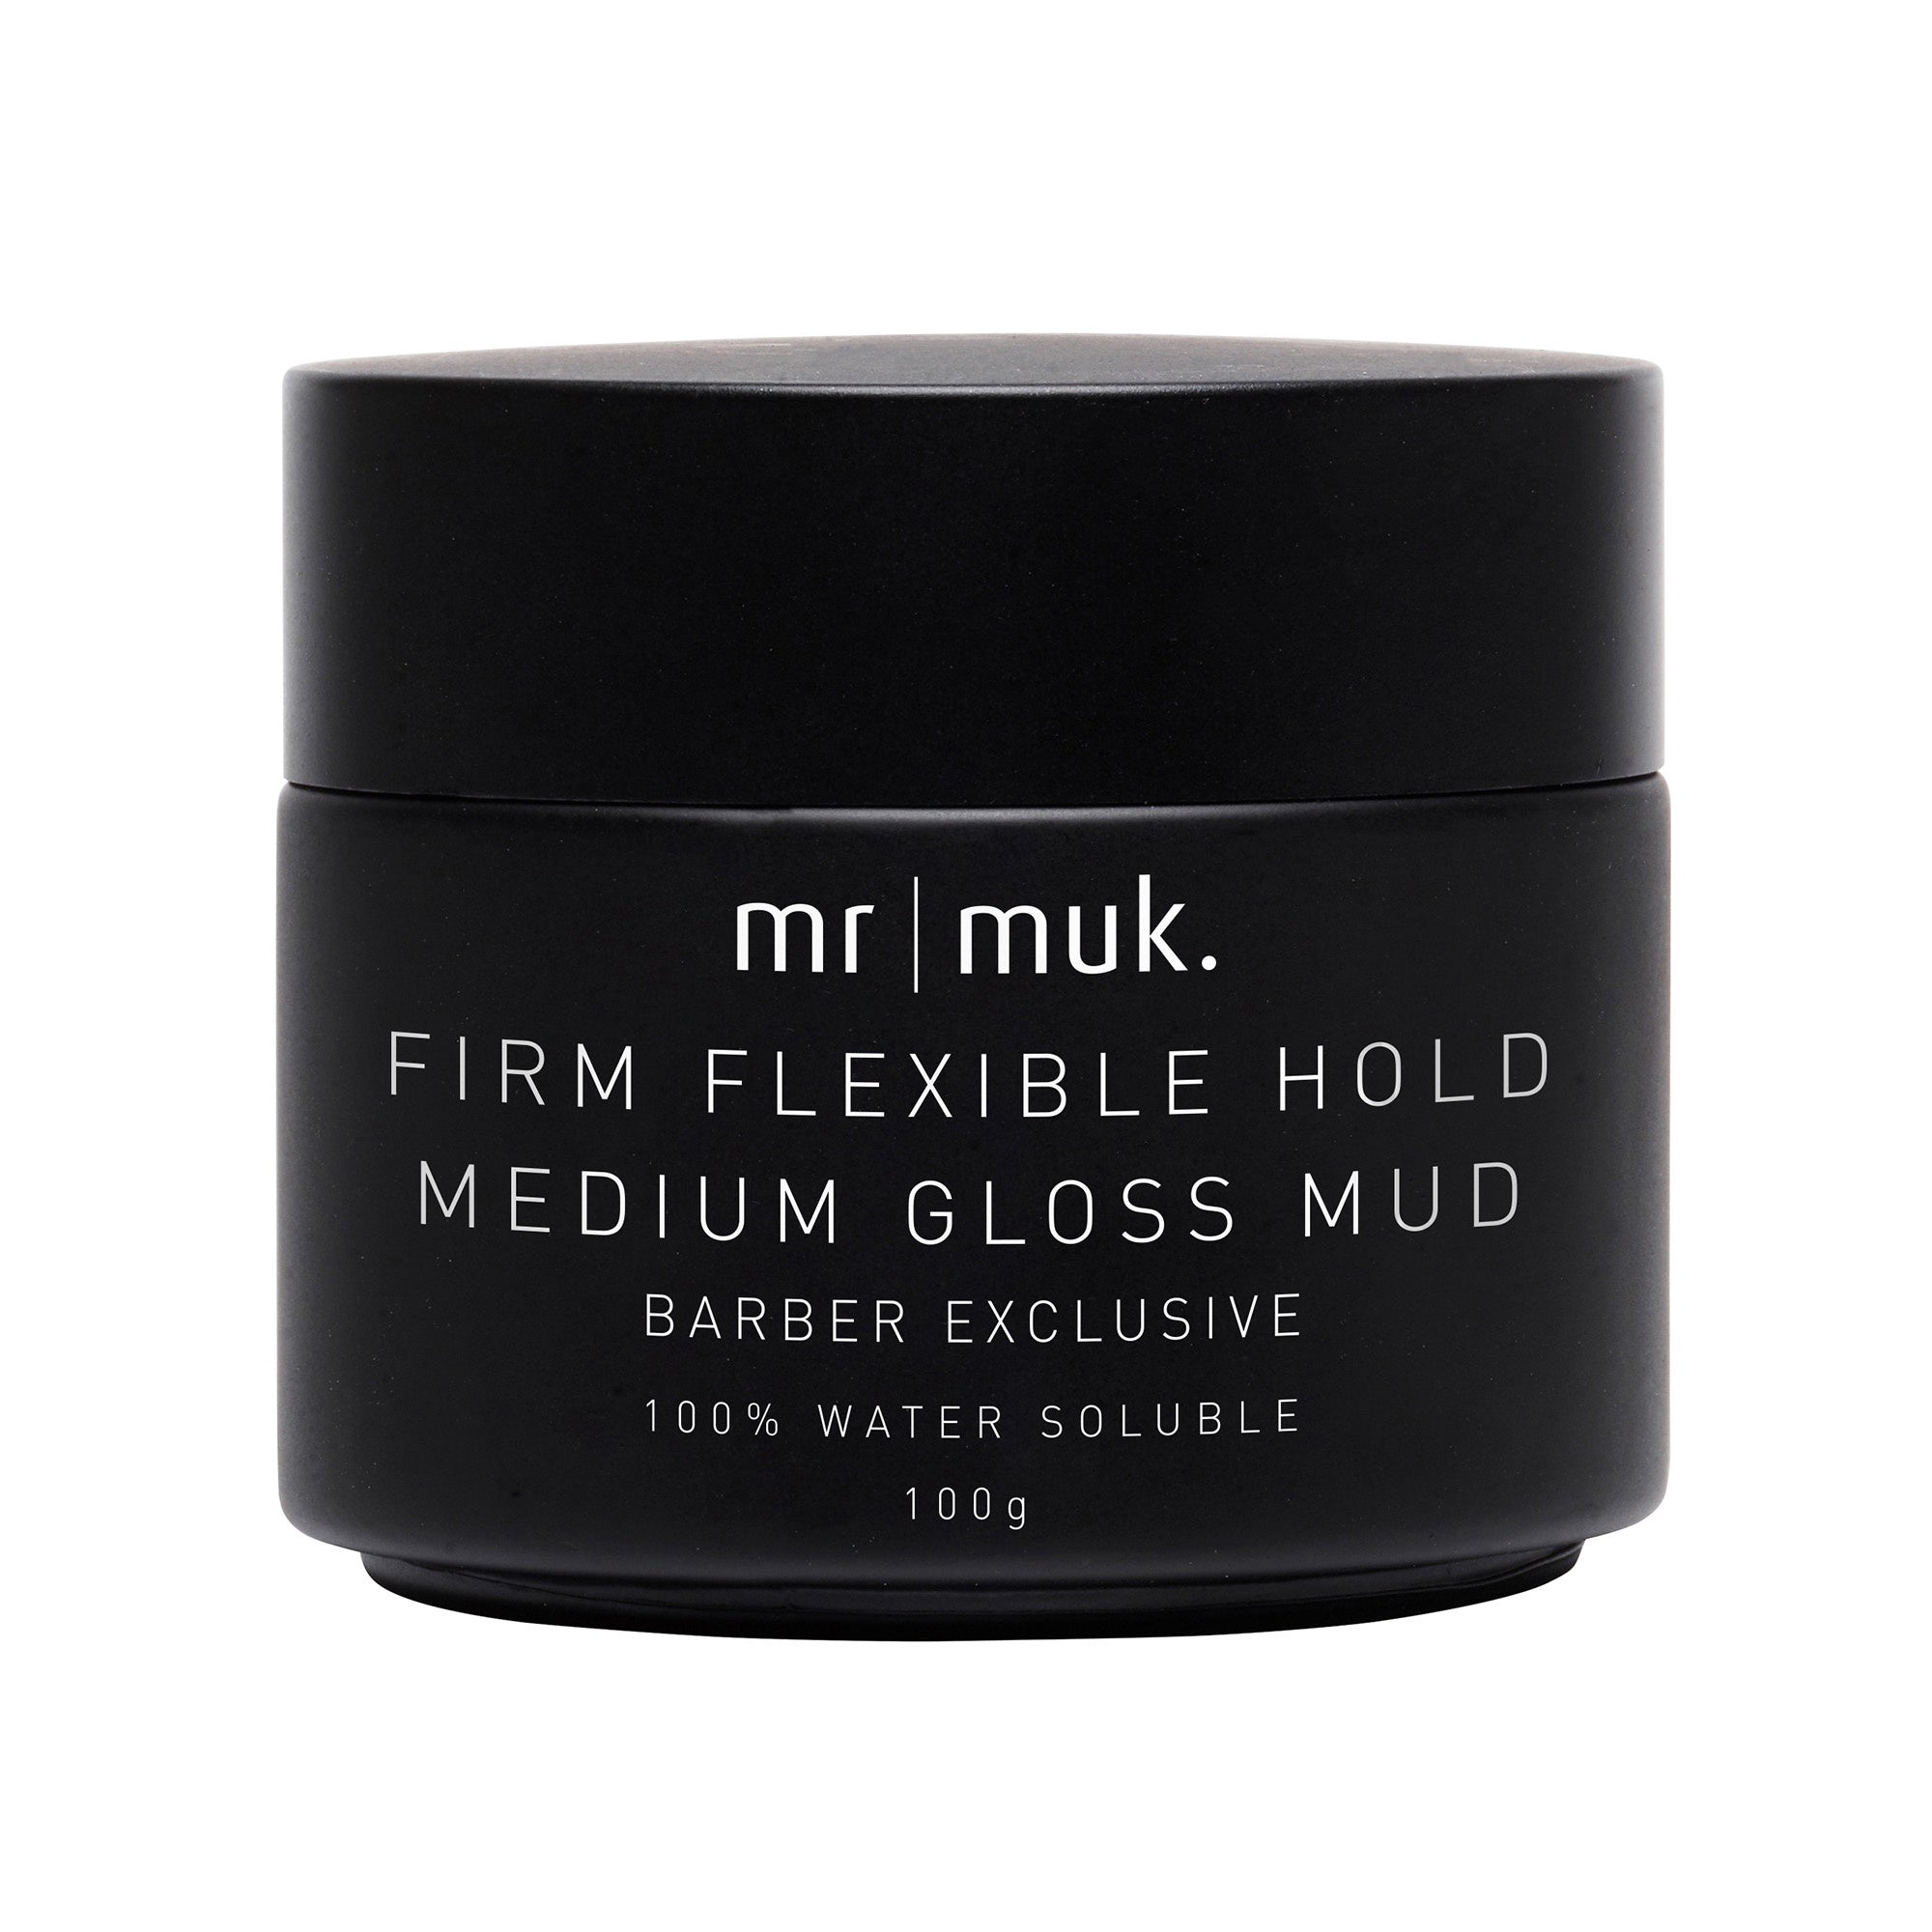 Mr Muk Firm Flexible Hold Medium Gloss Mud provides firm hold and enhanced shine whilst leaving the hair touchable and defined. 